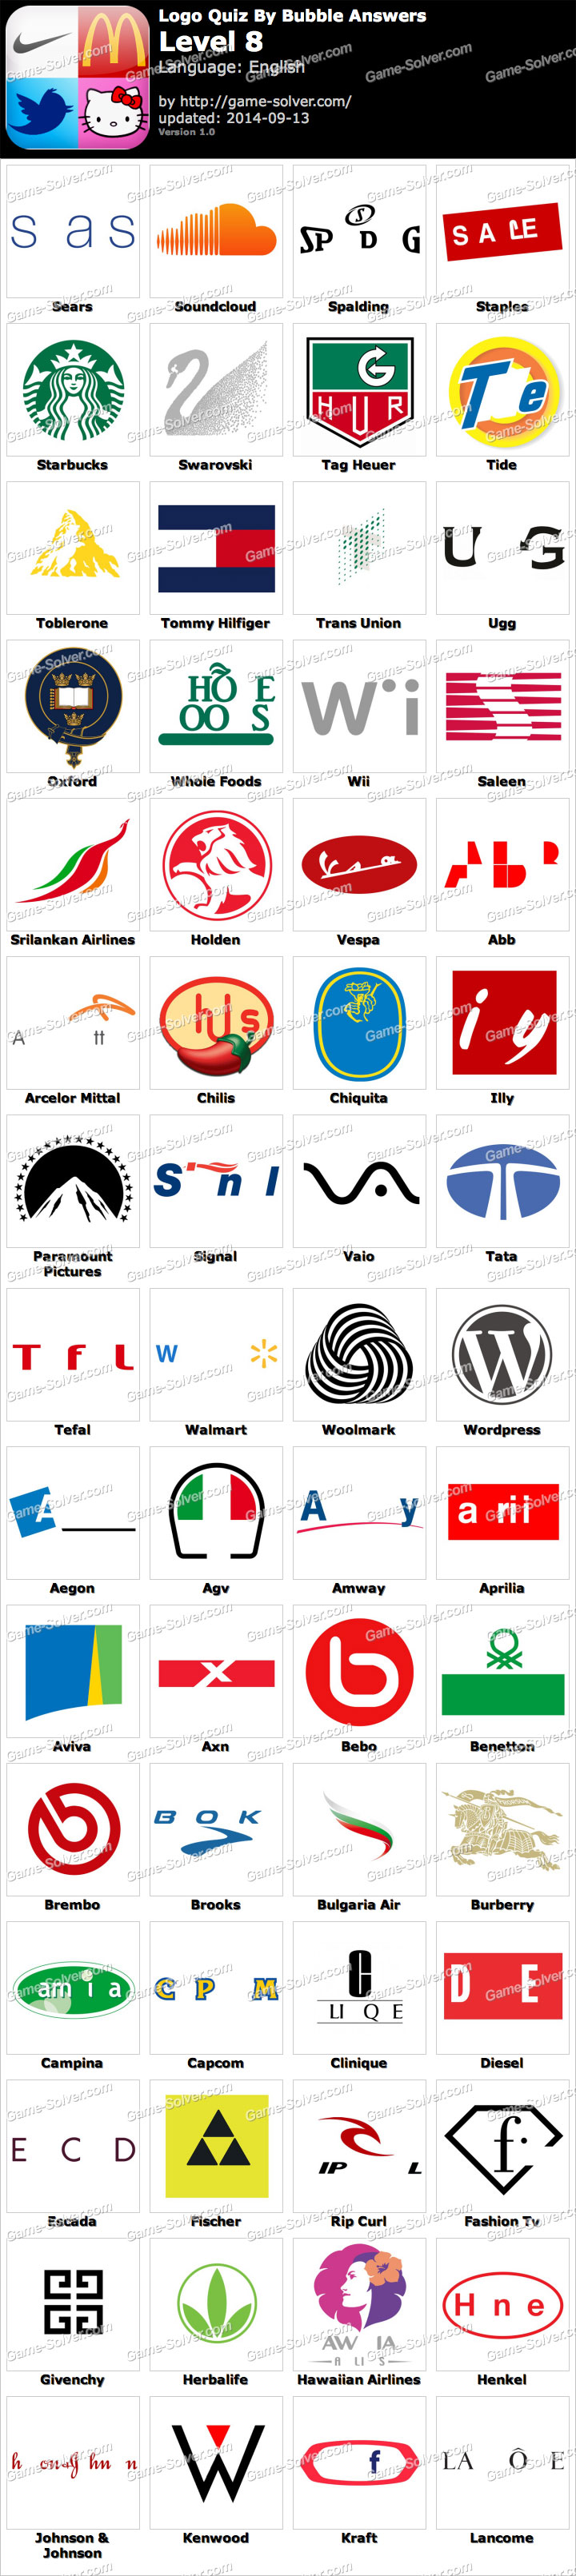 Logo Quiz for Android - the complete solutions for levels 1 to 8.